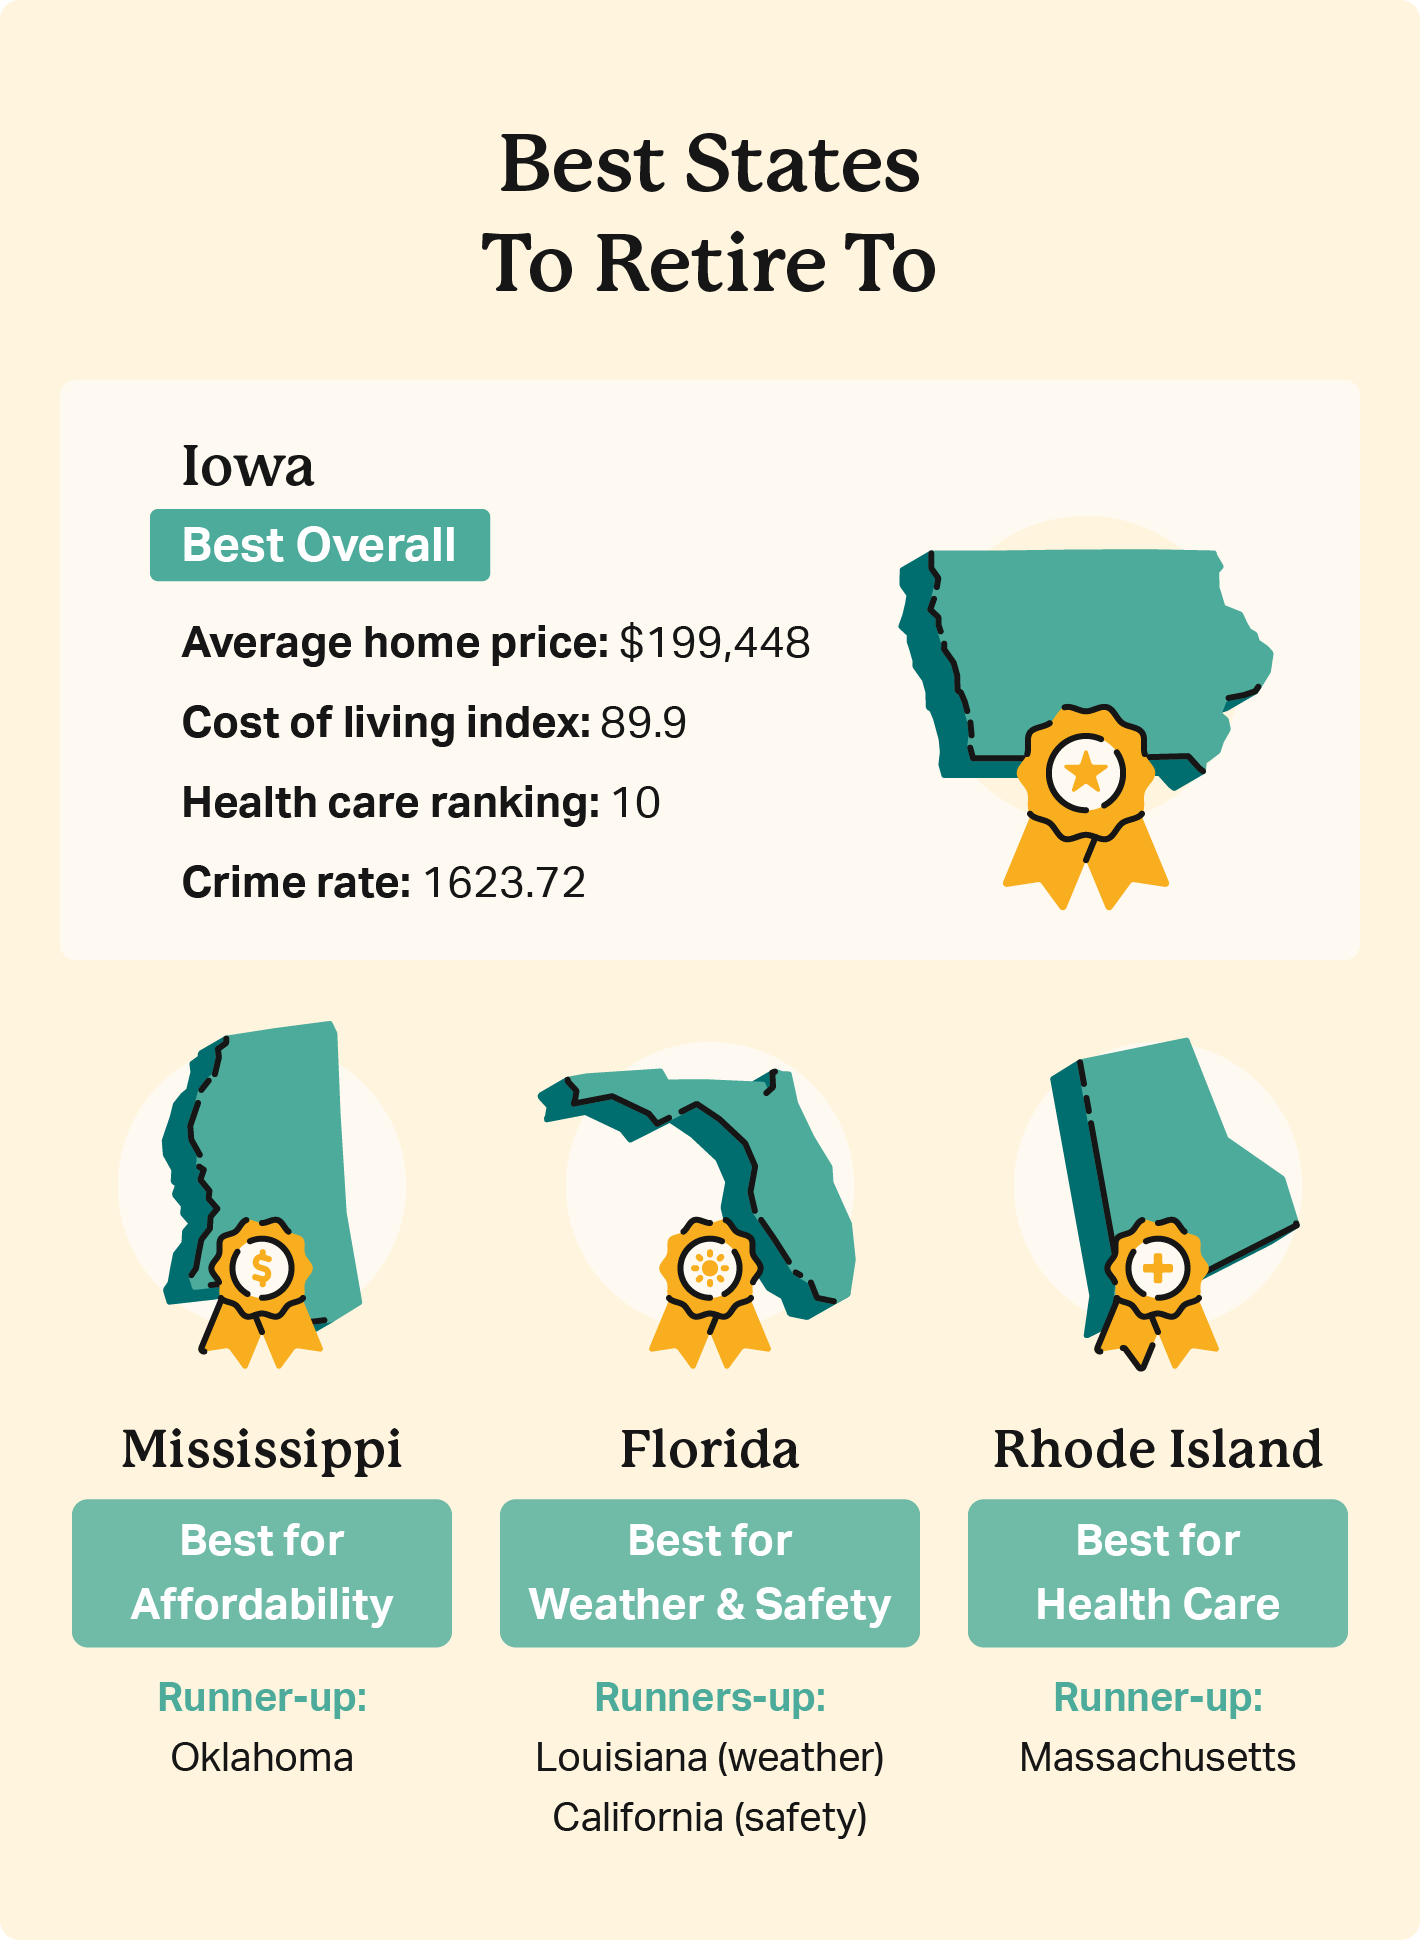 A graphic shows the best states to retire to for affordability, weather, safety, and health care.